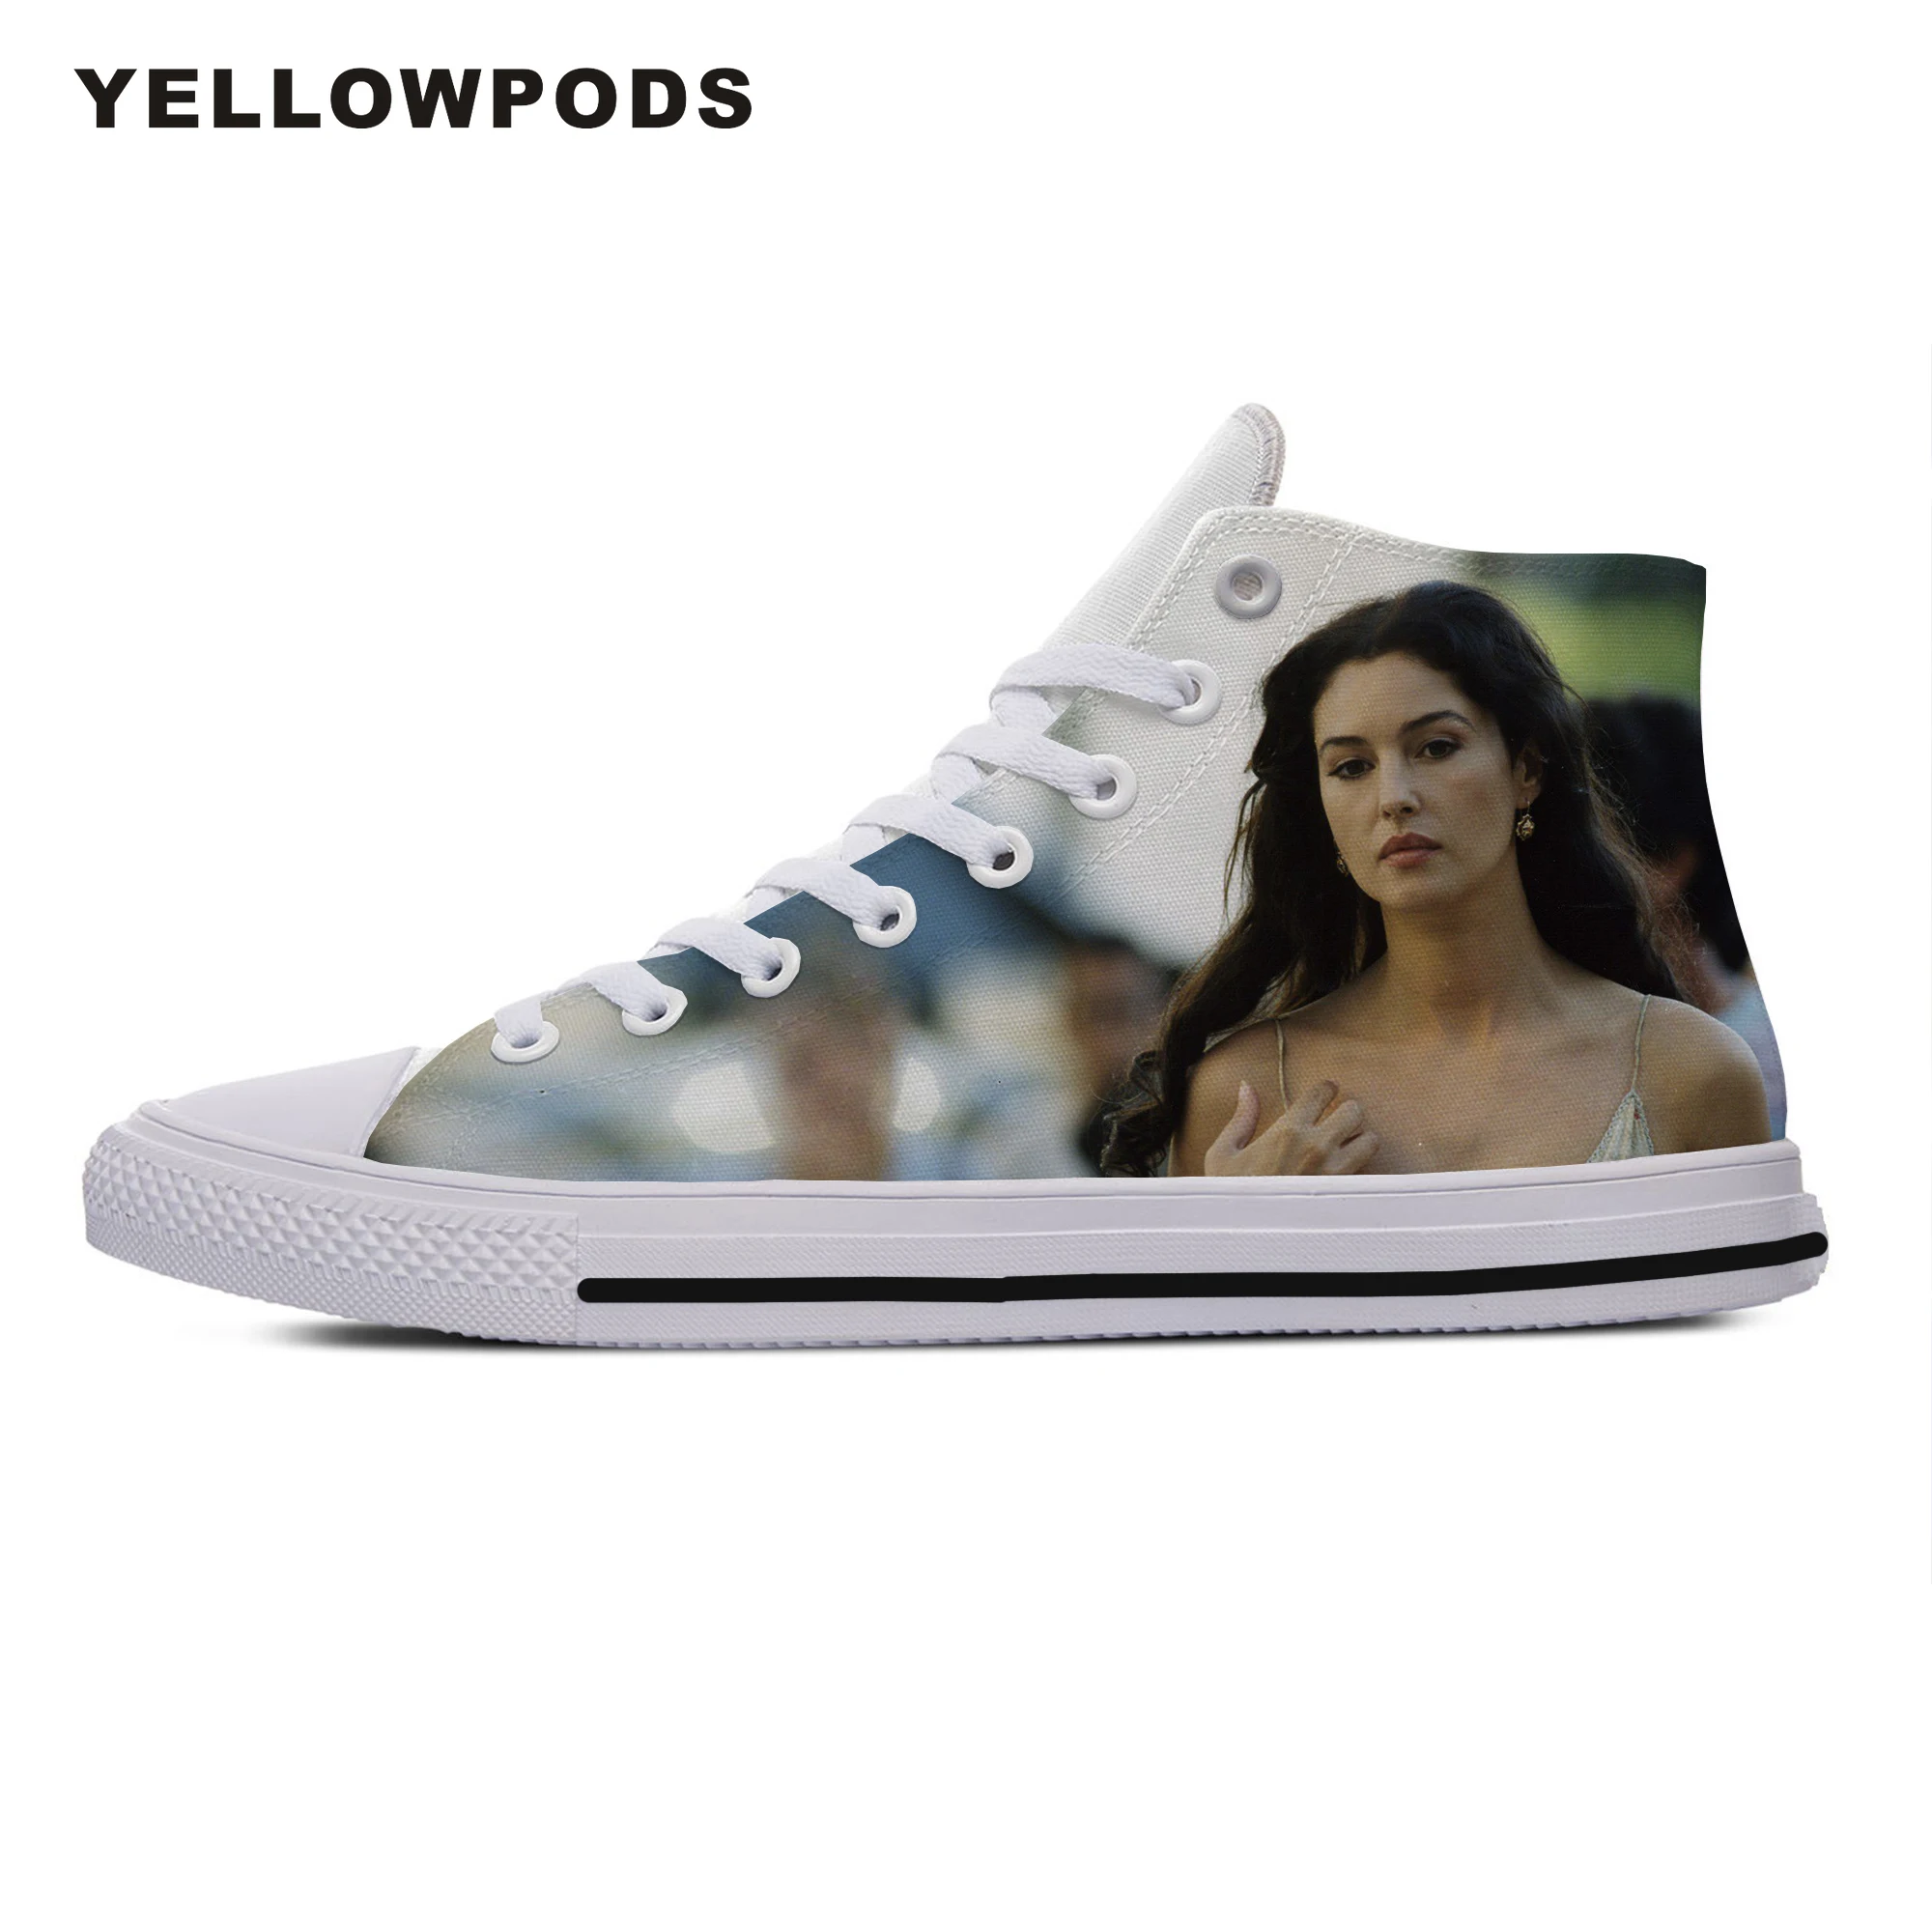 

Personality Men's Casual Shoes Hot Cool Pop Funny Handiness Monica Anna Maria Bellucci Cute Cartoon Custom Sneakers White